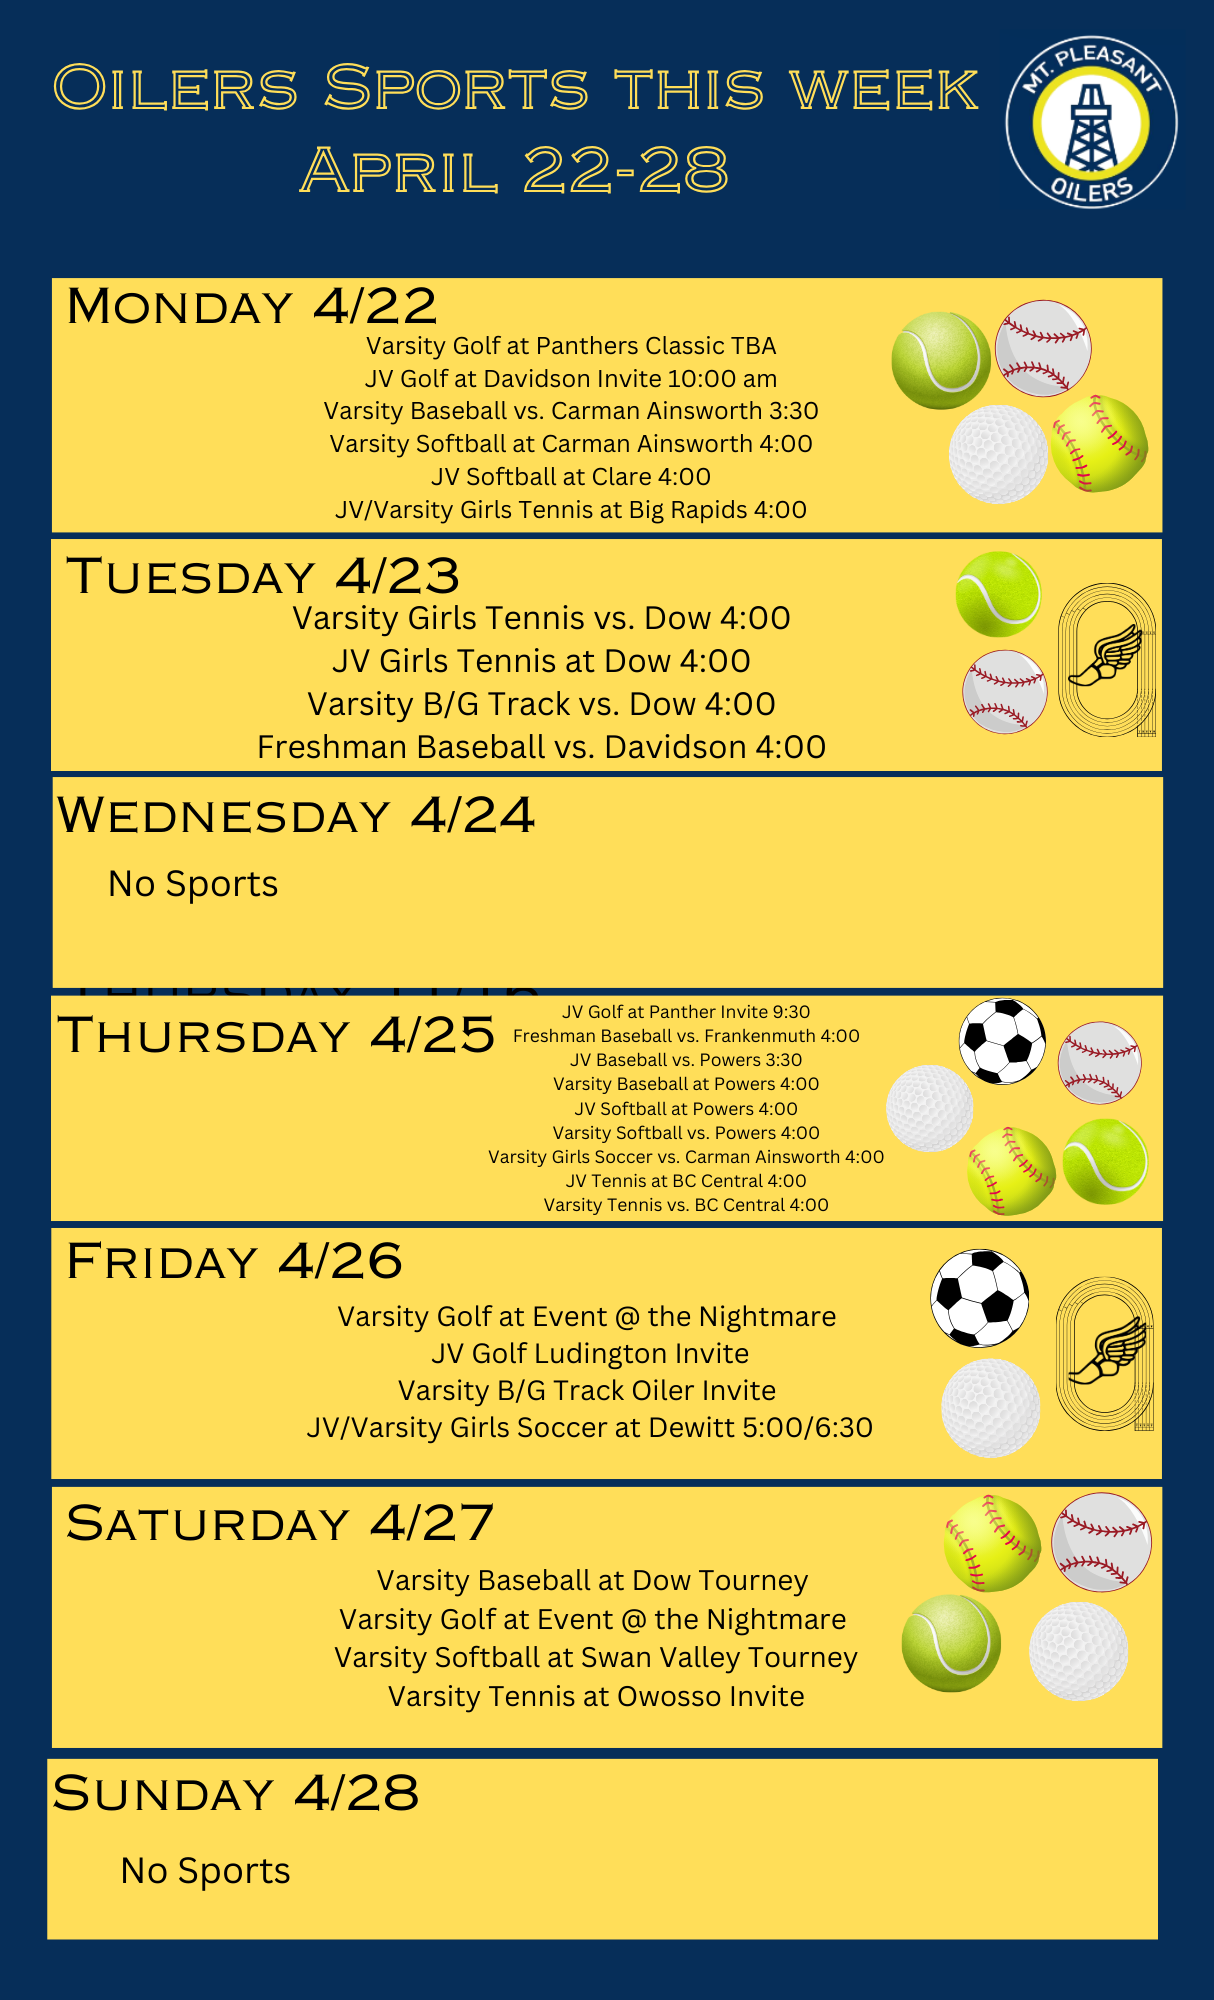 Sports for the Week